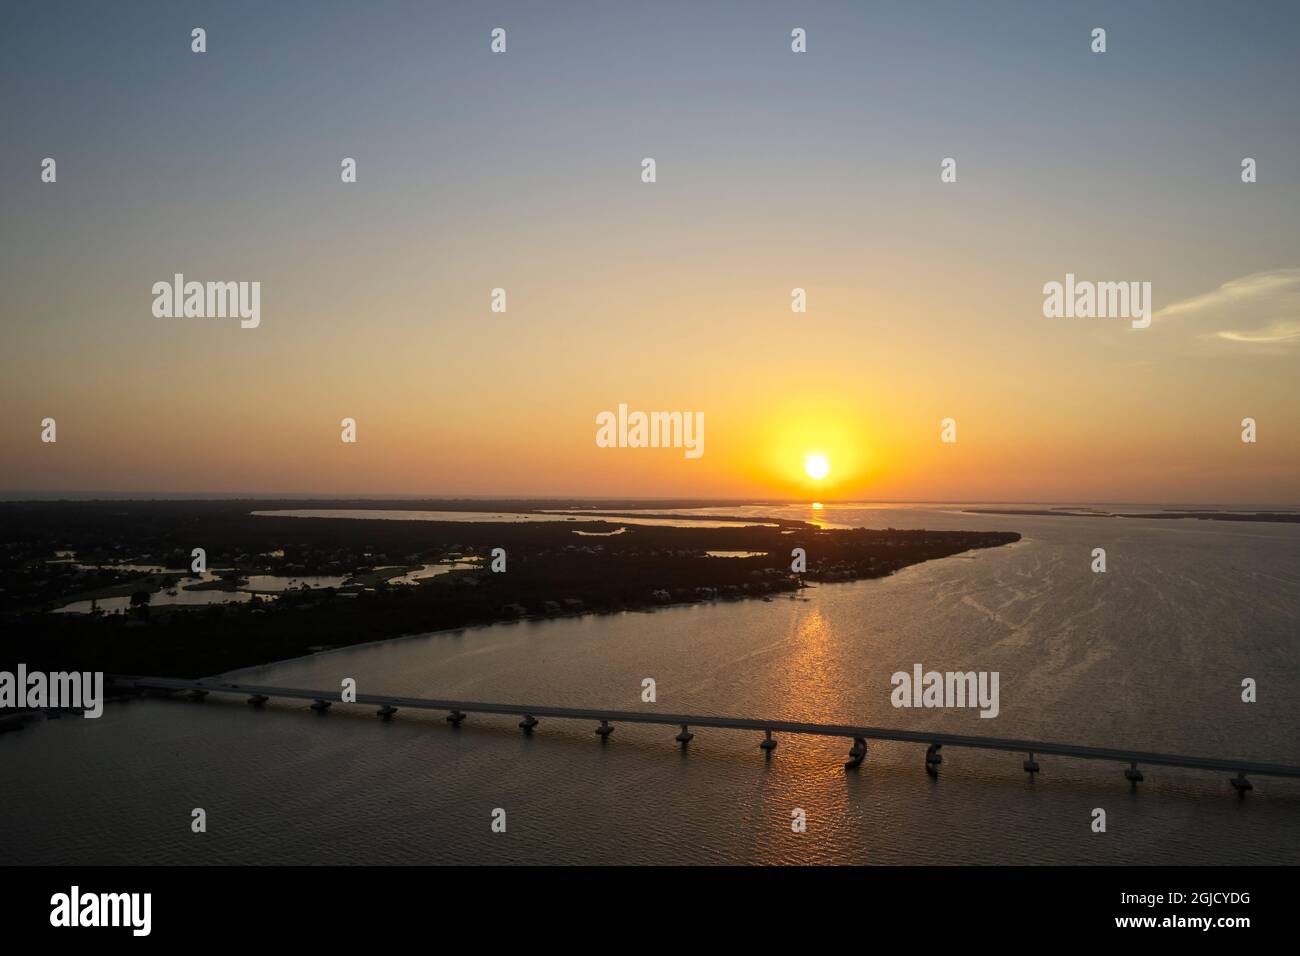 USA, Florida, Sanibel Island. Sunset over Sanibel Island and the Sanibel Causeway. Sanibel Island is a popular tourist destination and is known for it Stock Photo